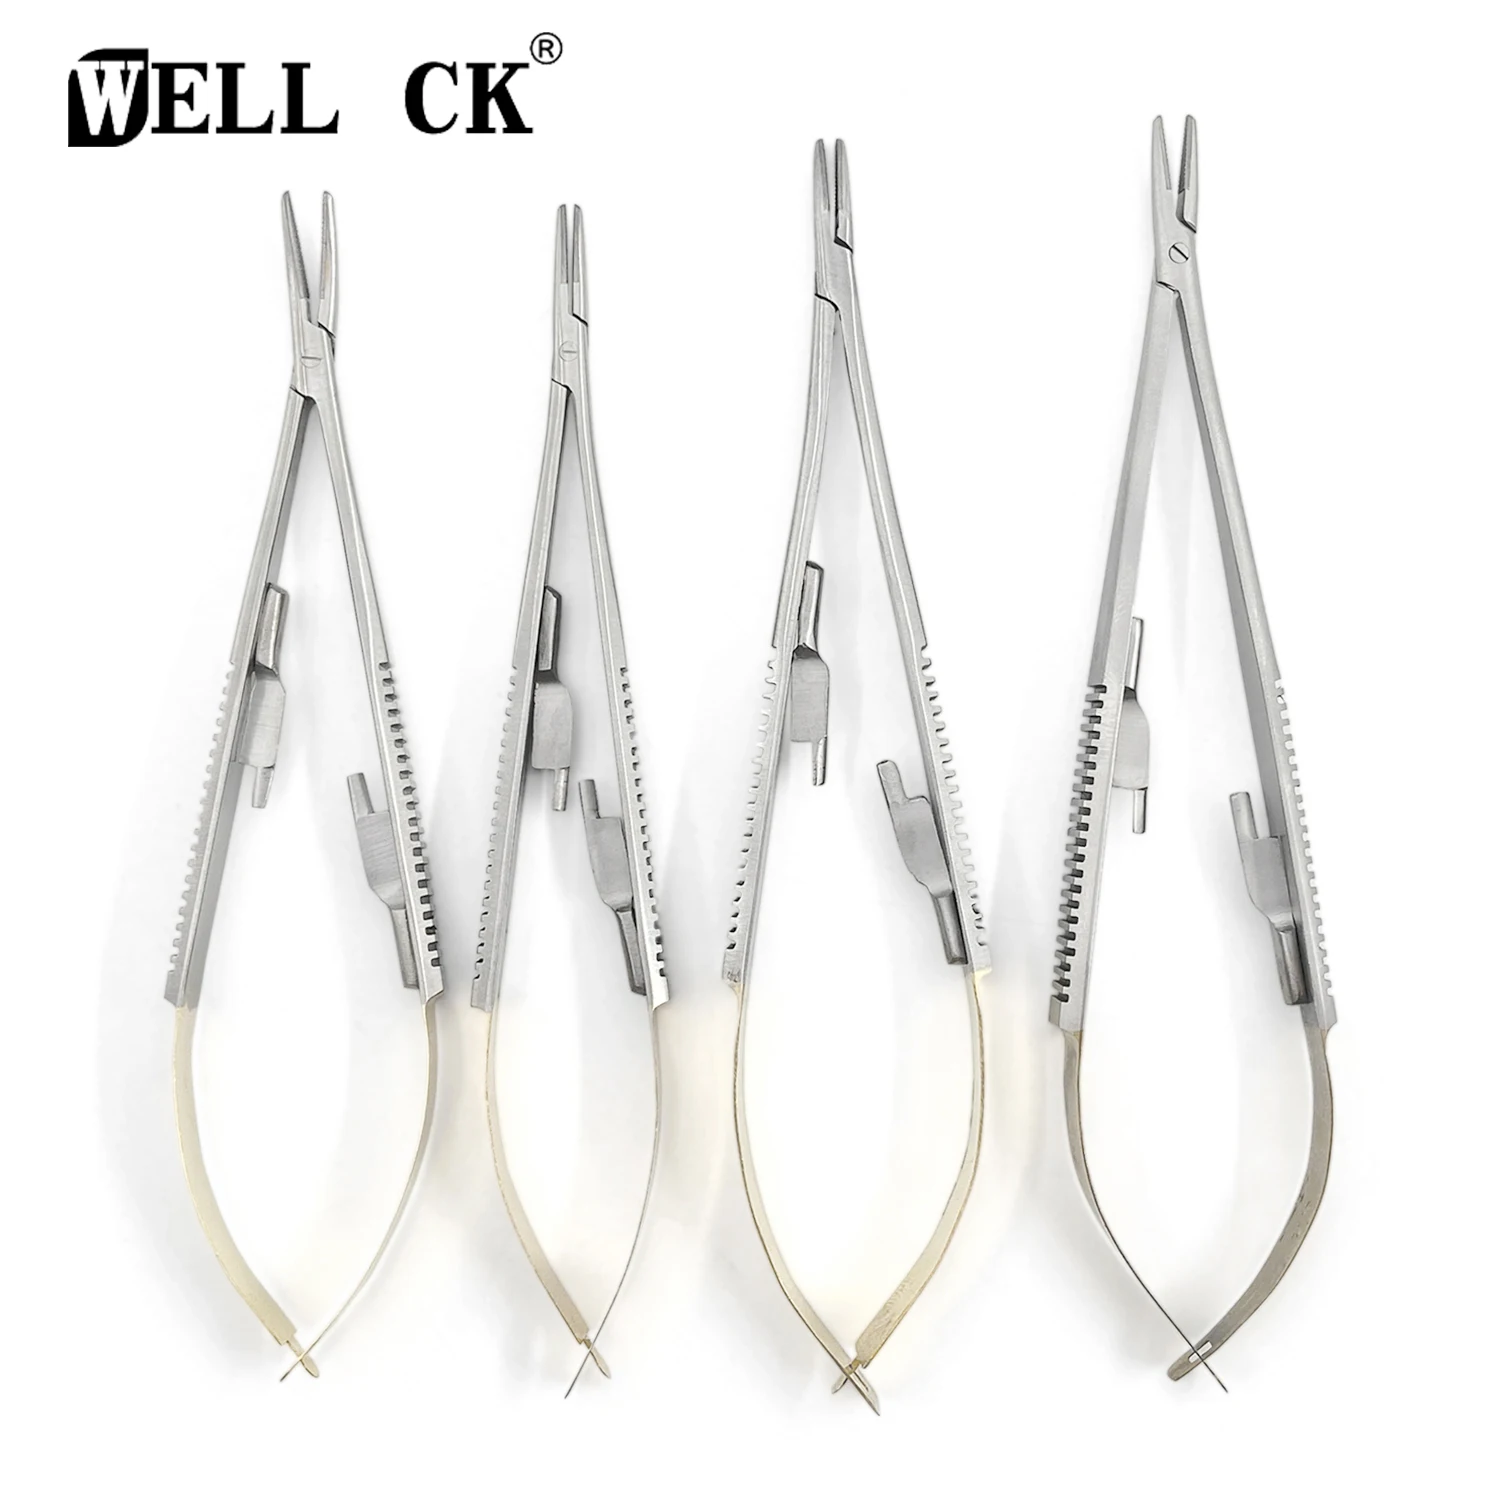 WELLCK Curved / Straight Surgical Dental Orthodontic Implant Castroviejo Needle Holders 14cm 16cm Dental Lab Instrument